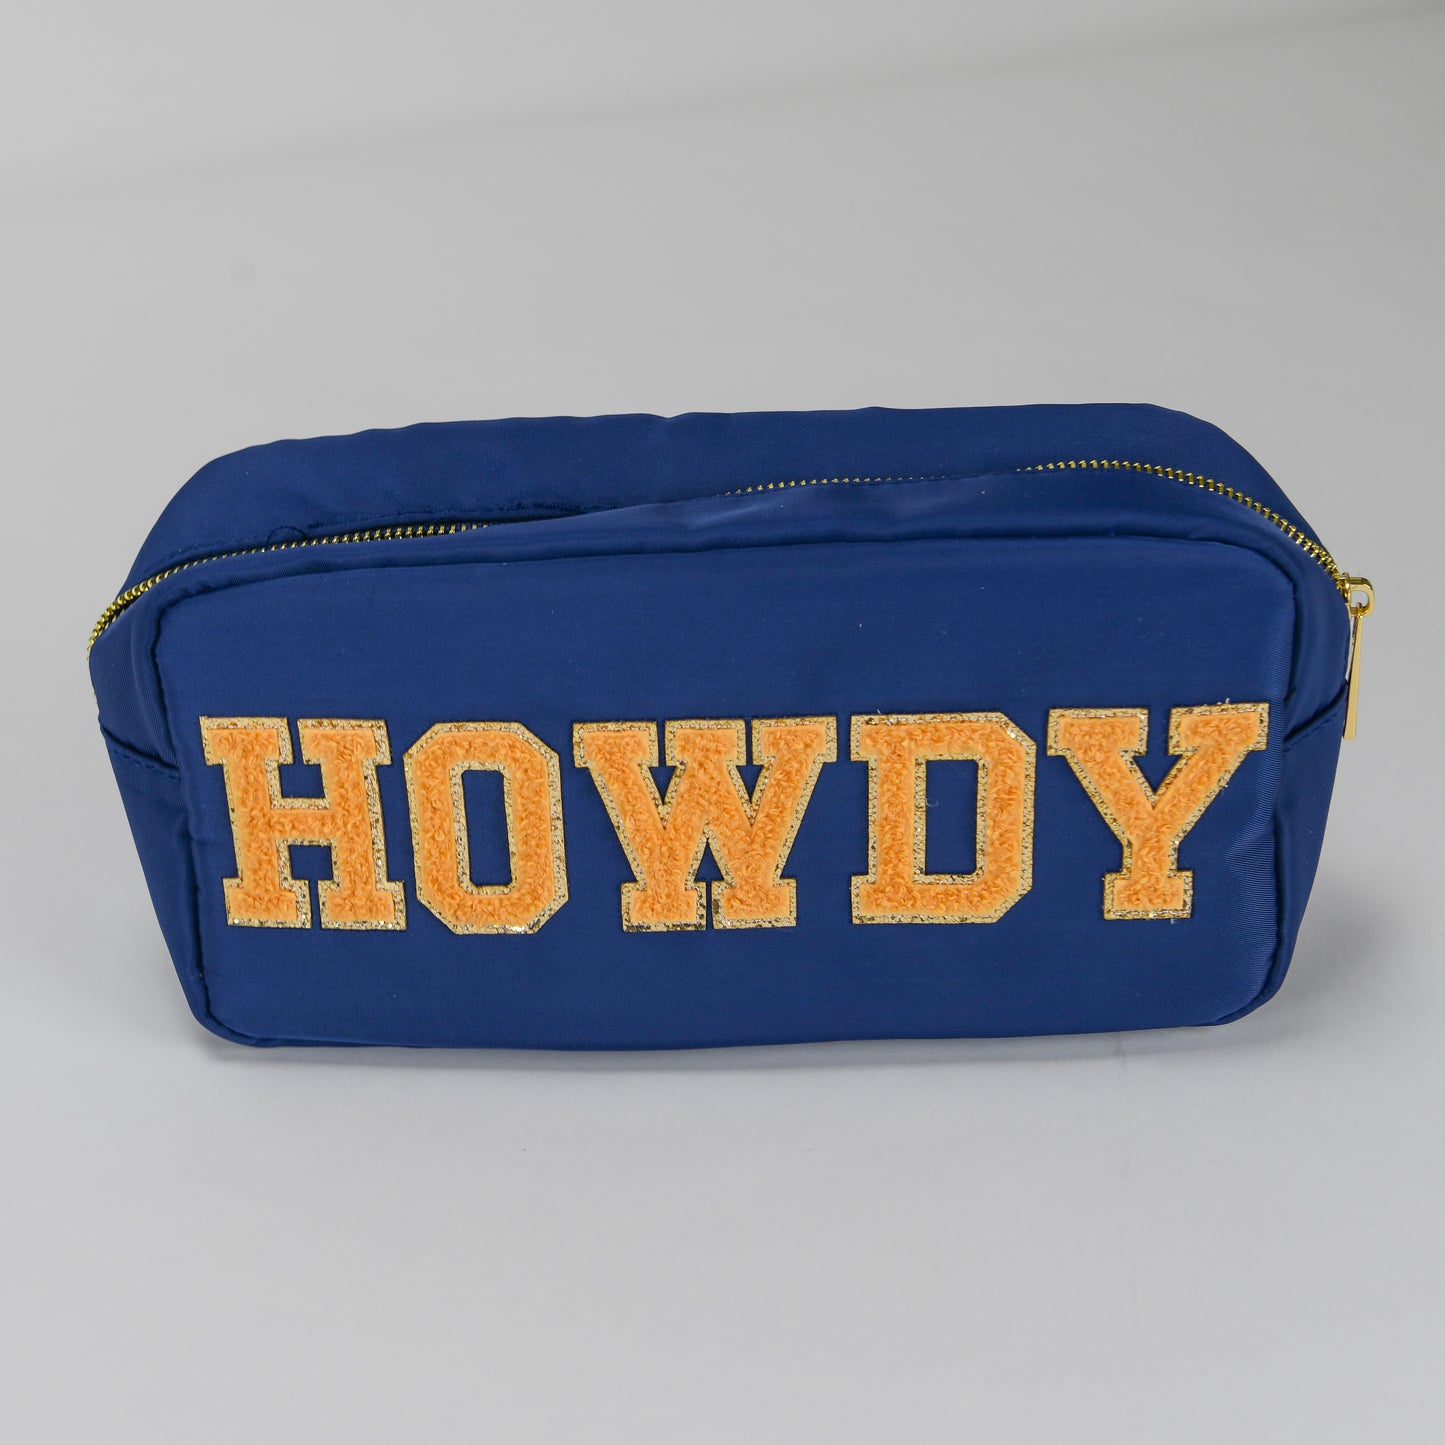 Howdy LG Pouch - Navy Sparkle